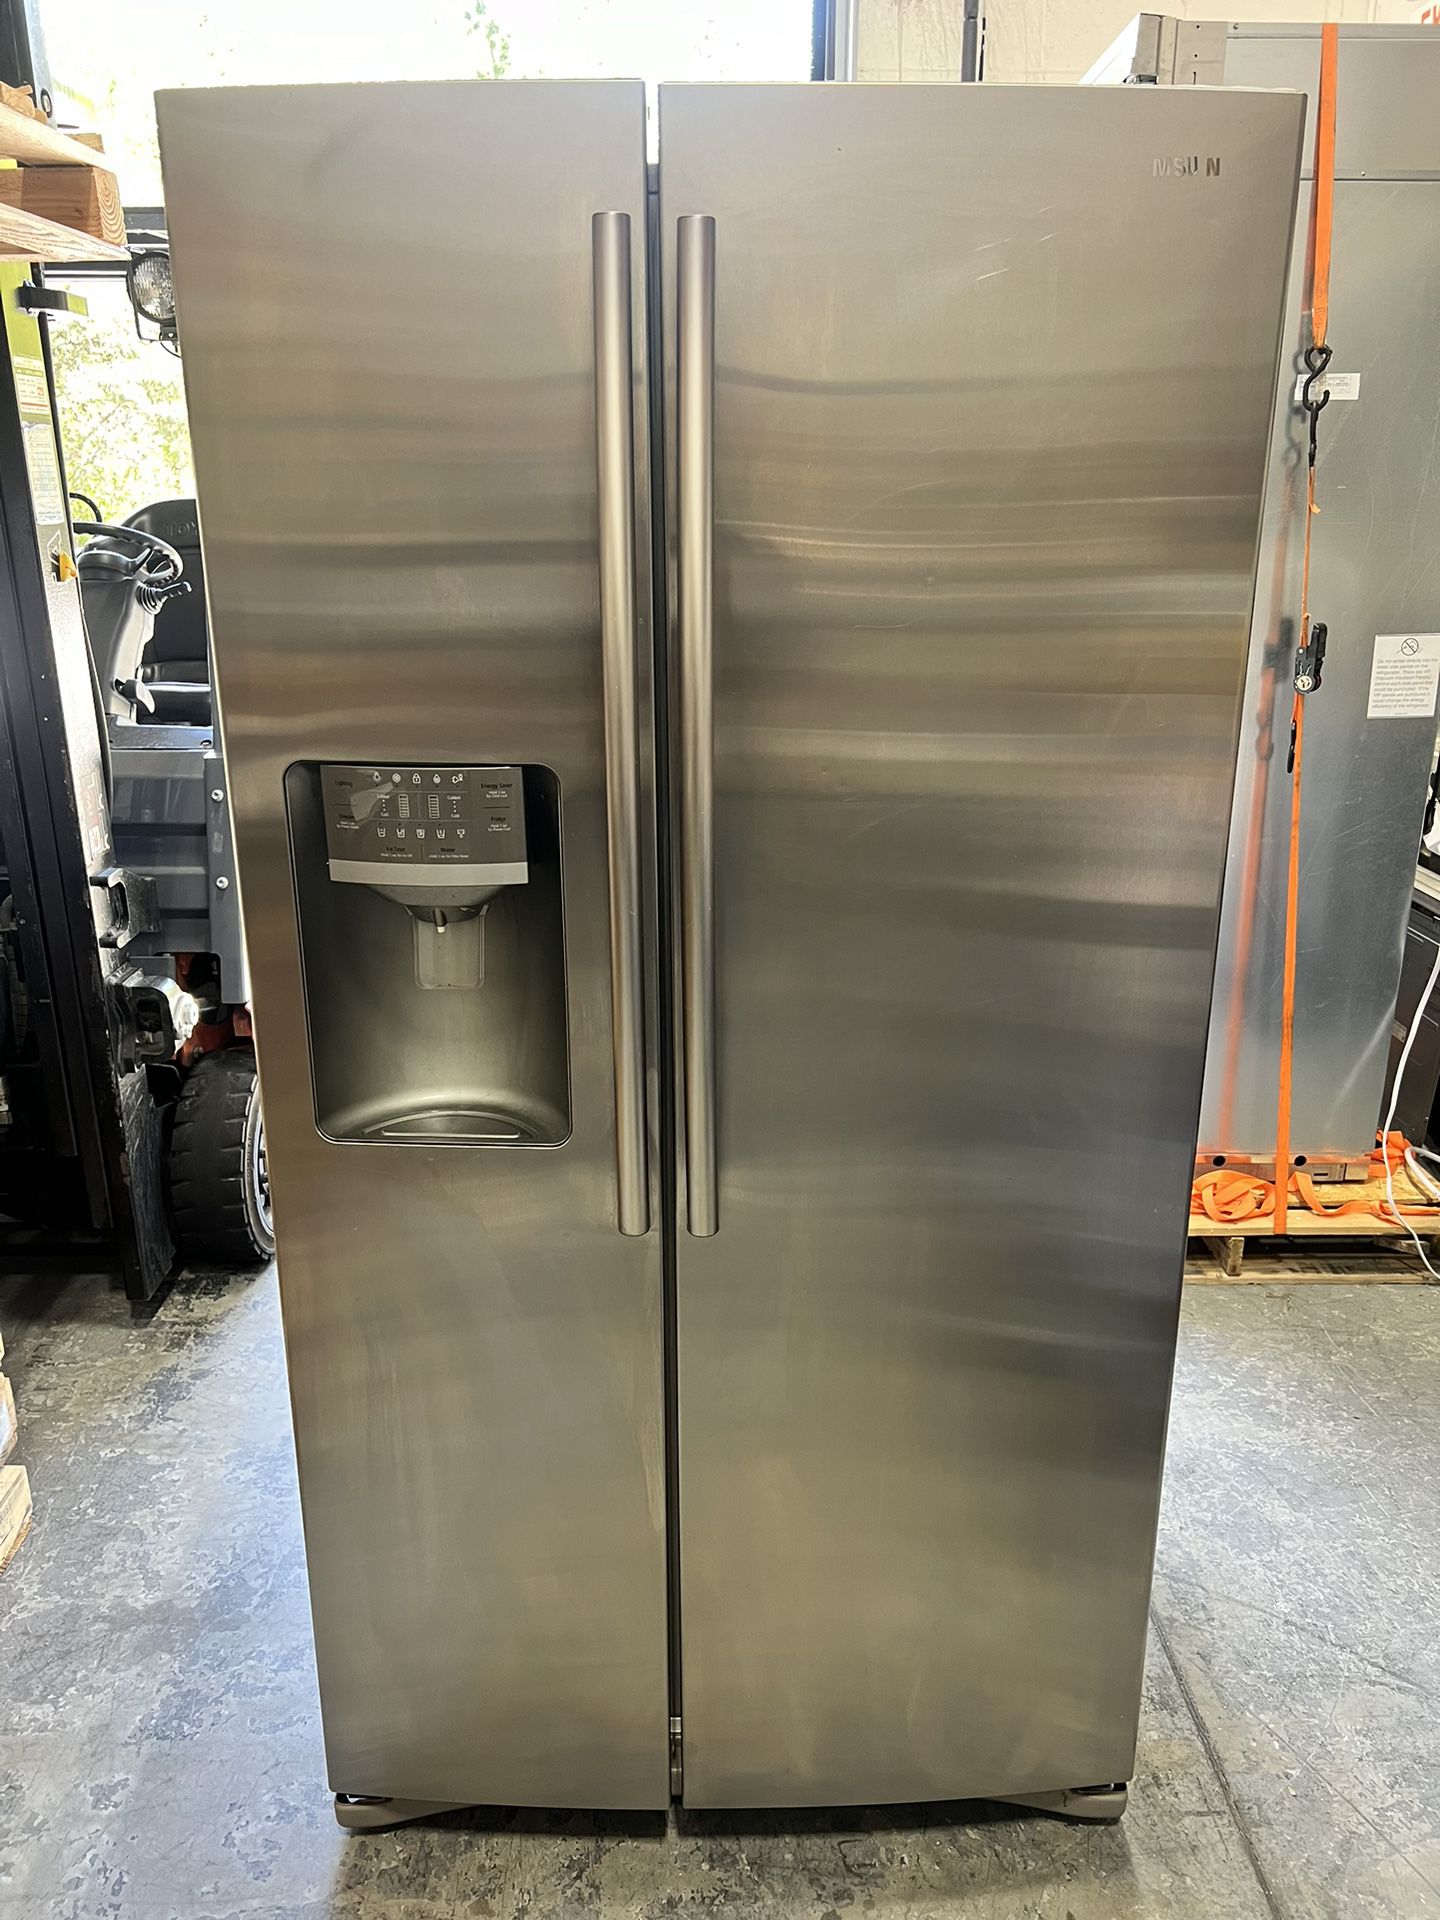 Gently Used Samsung Refrigerator Stainless Steel Fridge - Excellent!